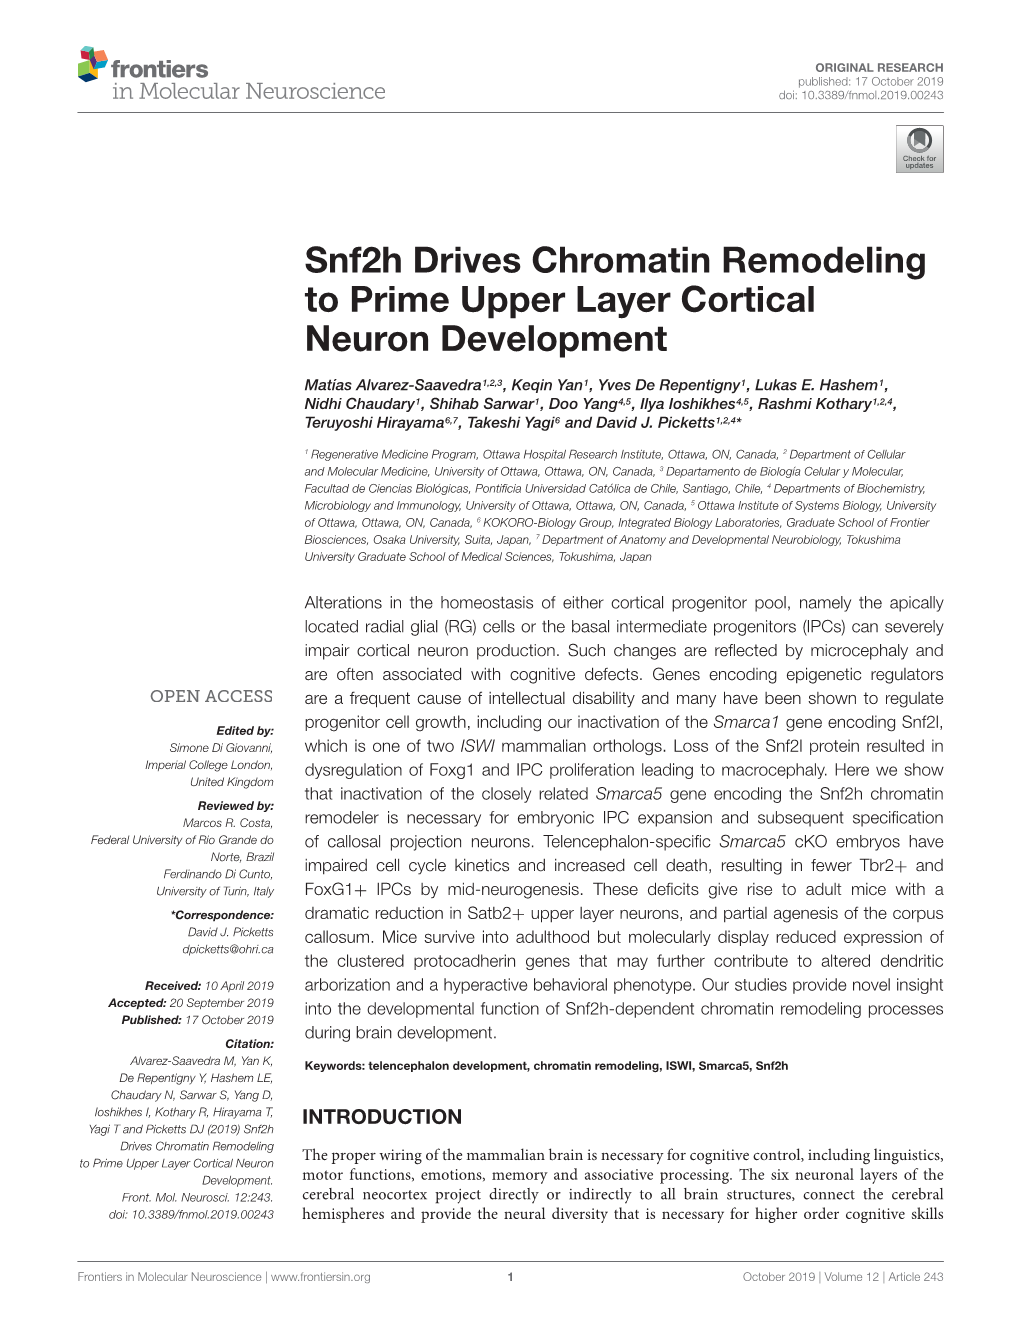 Snf2h Drives Chromatin Remodeling to Prime Upper Layer Cortical Neuron Development